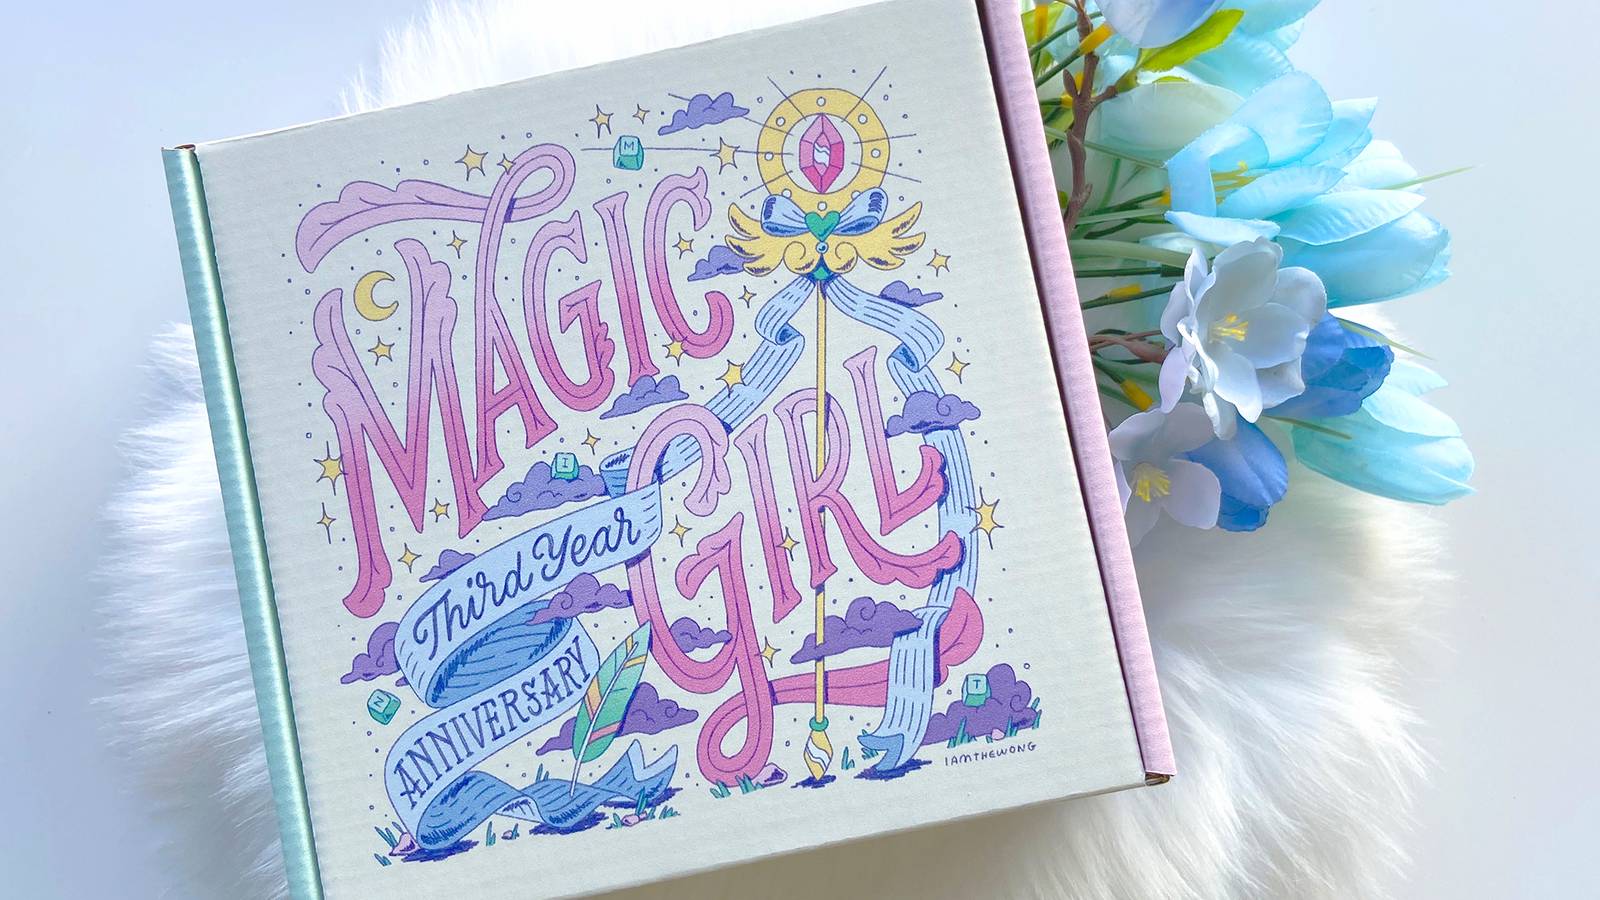 Magic Girl by Mintlodica lettering artwork by illustrator Matthew Wong celebration the third anniversary collectibles including boxes, postcards, and stickers. Featuing cute ribbons, wings, magic staff, moons, stars, and a feather.